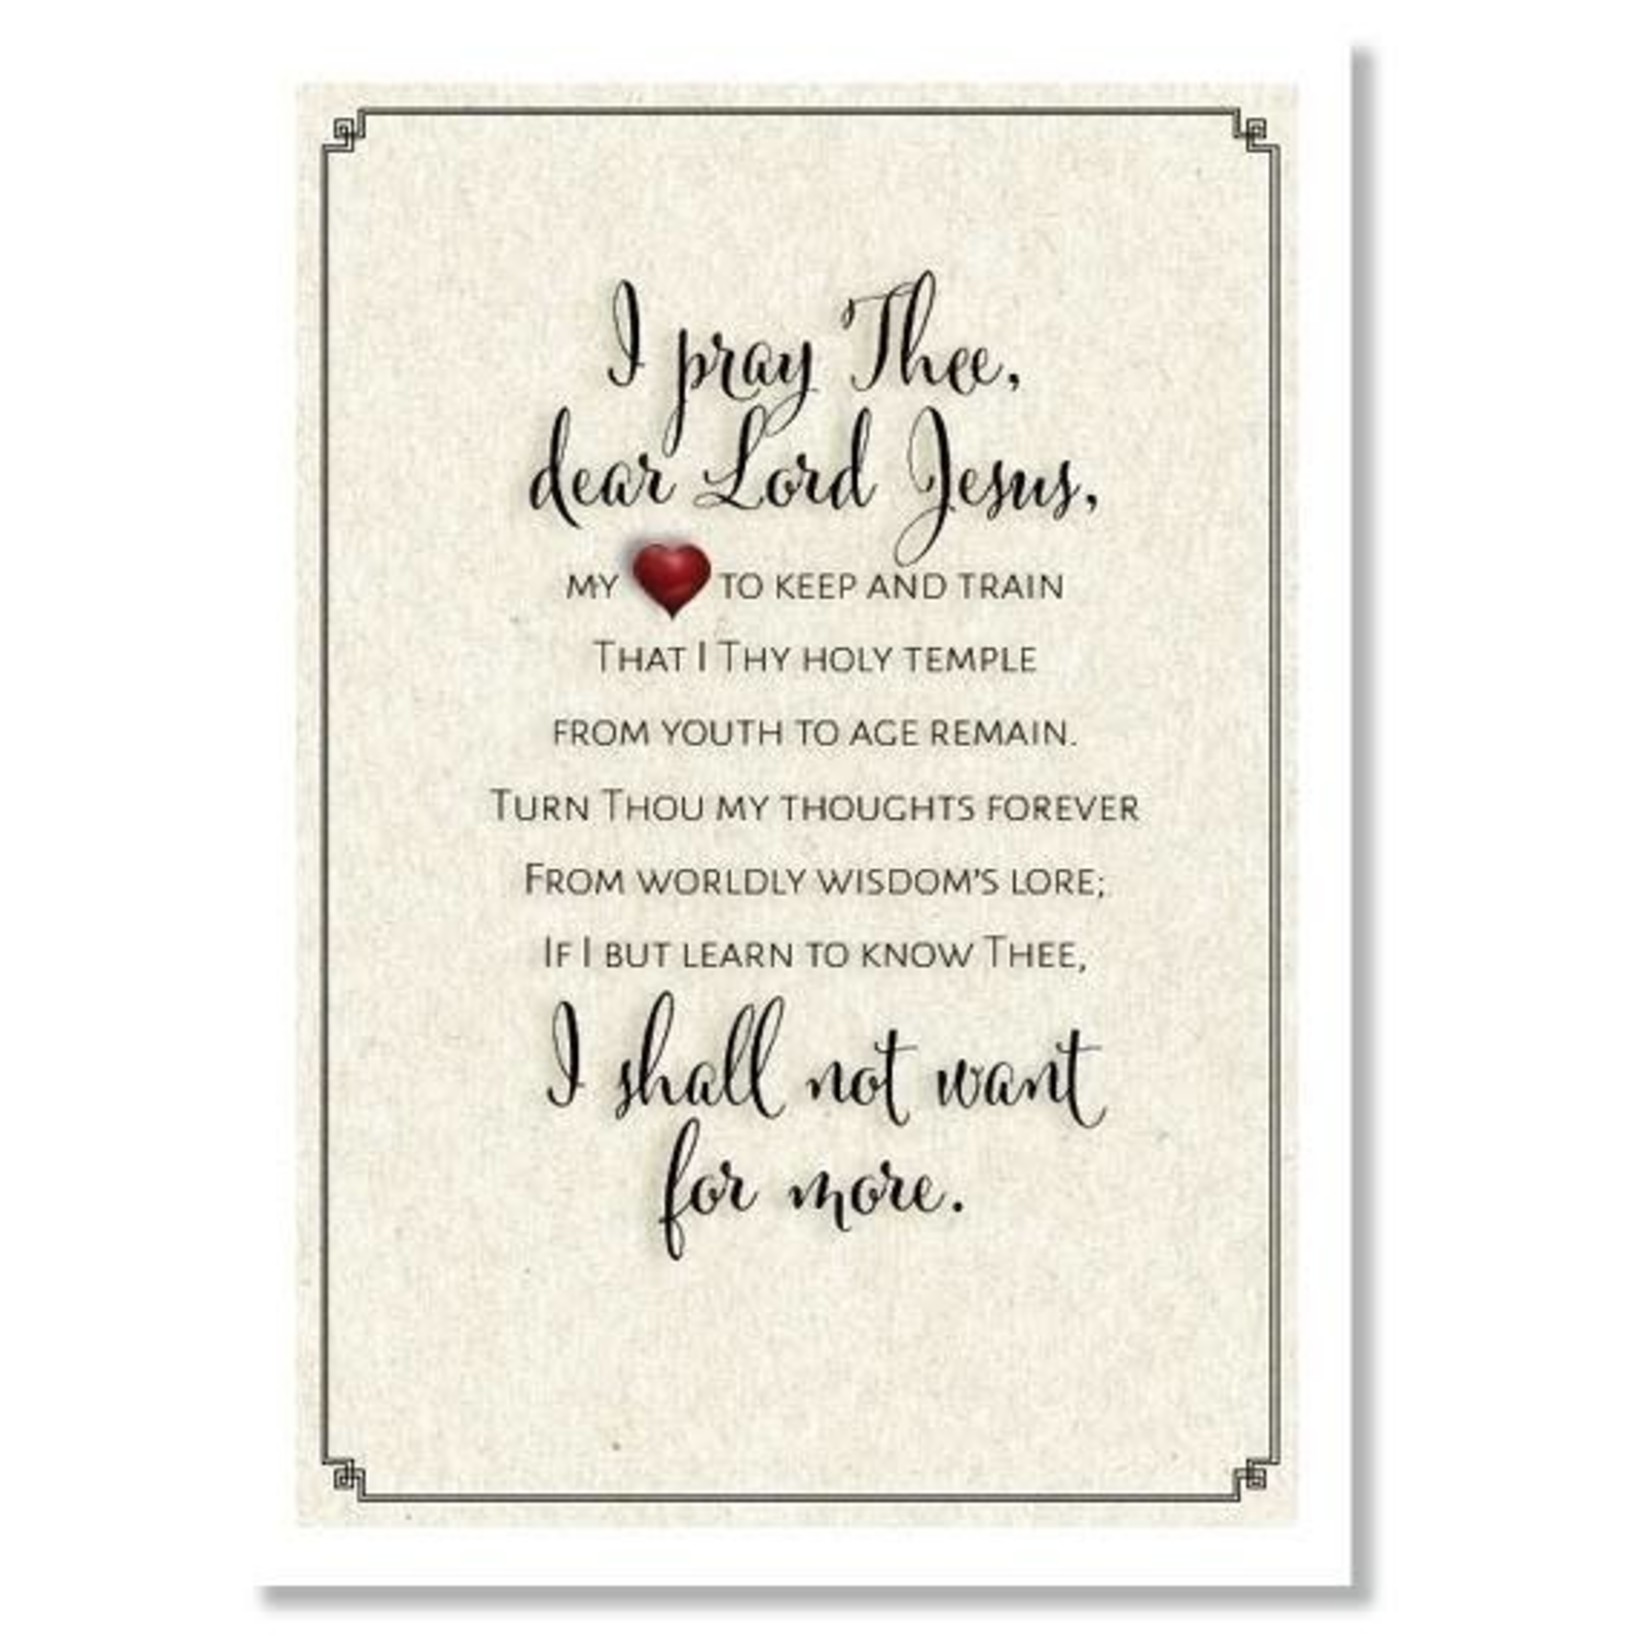 Hymns In My Heart Hymns In My Heart - 5x7" Greeting Card - Confirmation - I Pray Thee, Dear Lord Jesus